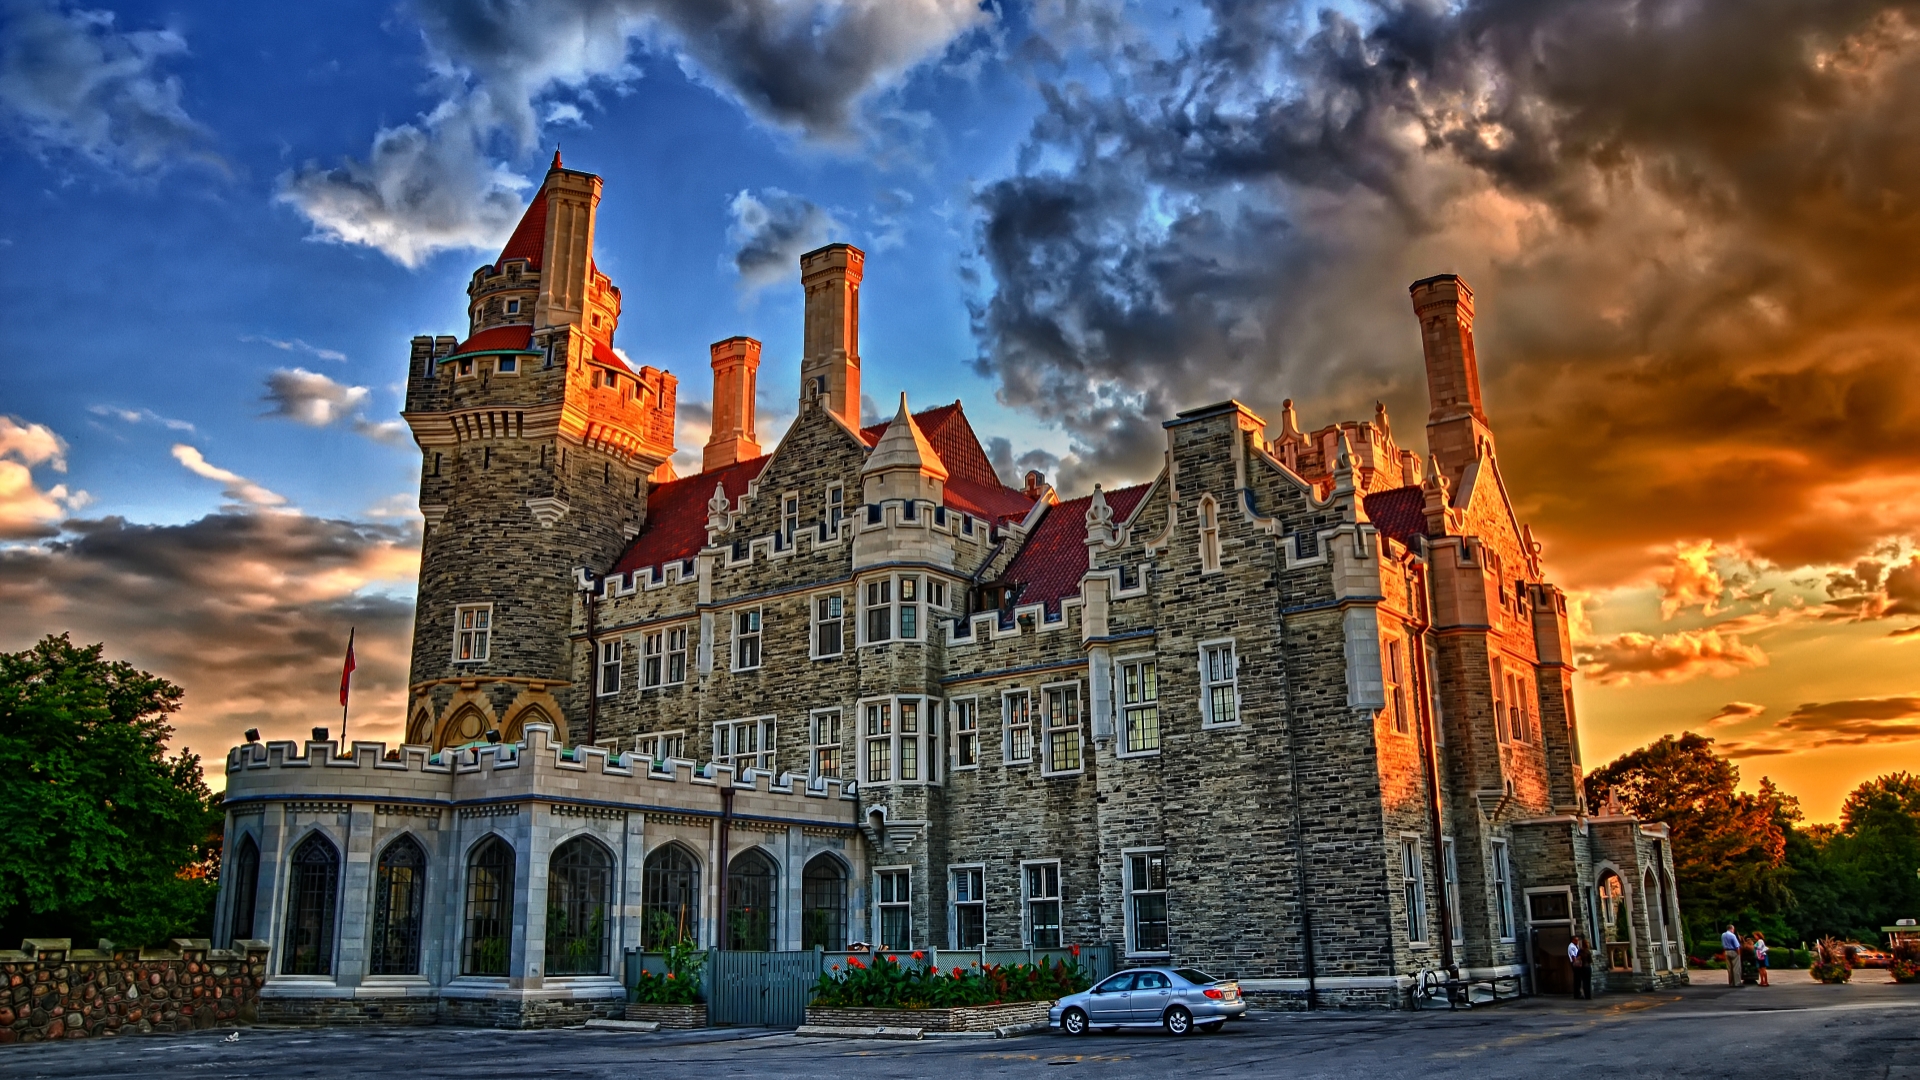 33 Casa Loma HD Wallpapers | Backgrounds - Wallpaper Abyss